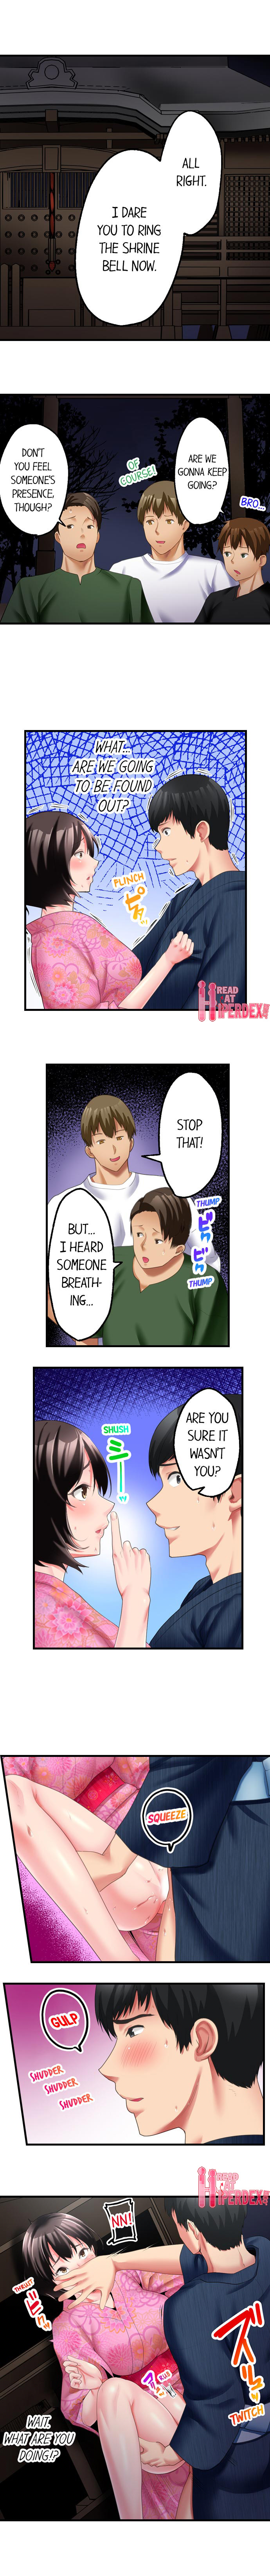 #Busted by my Co-Worker - Chapter 8 Page 7